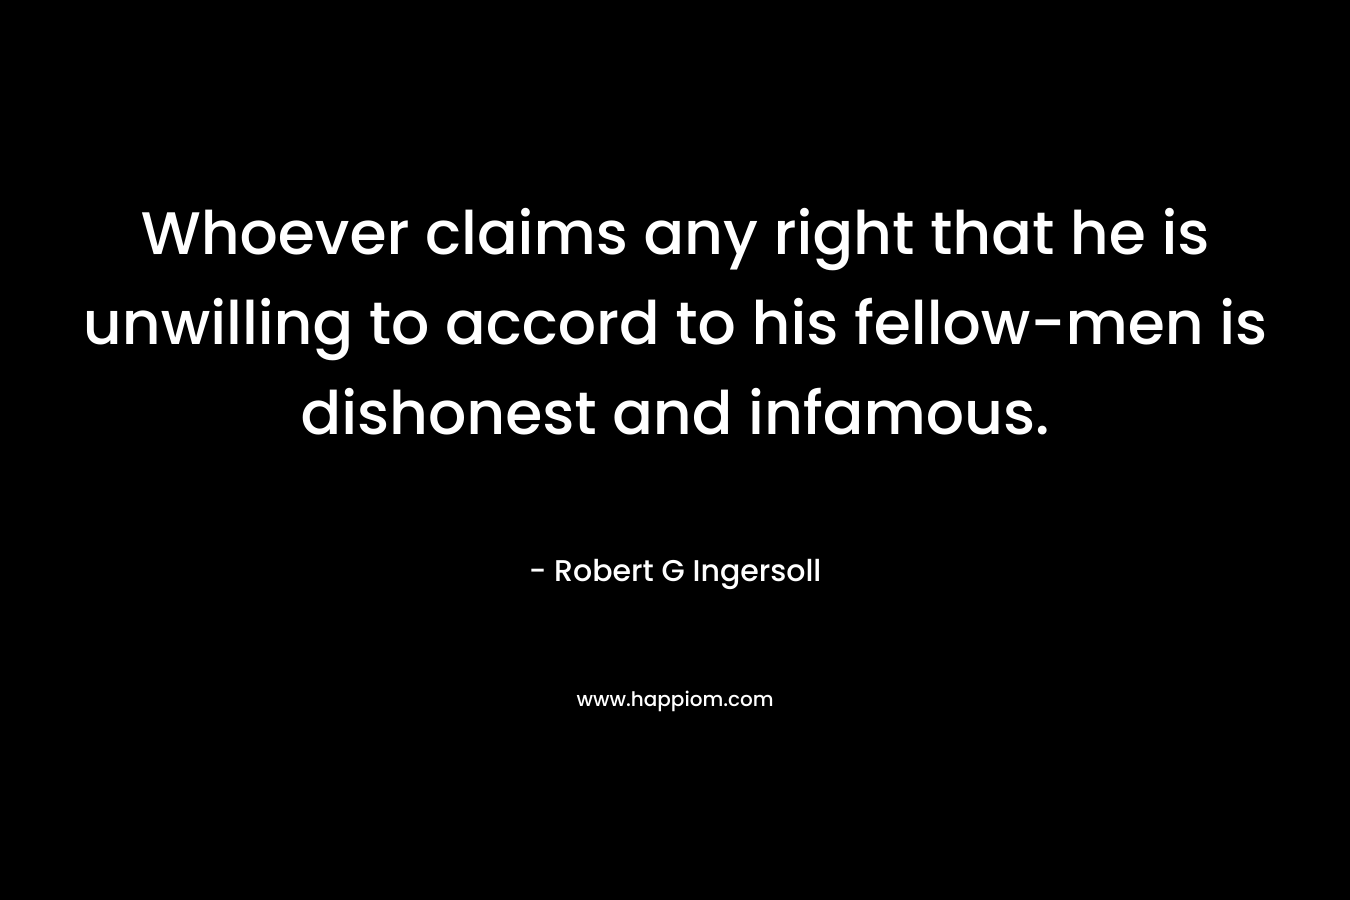 Whoever claims any right that he is unwilling to accord to his fellow-men is dishonest and infamous.